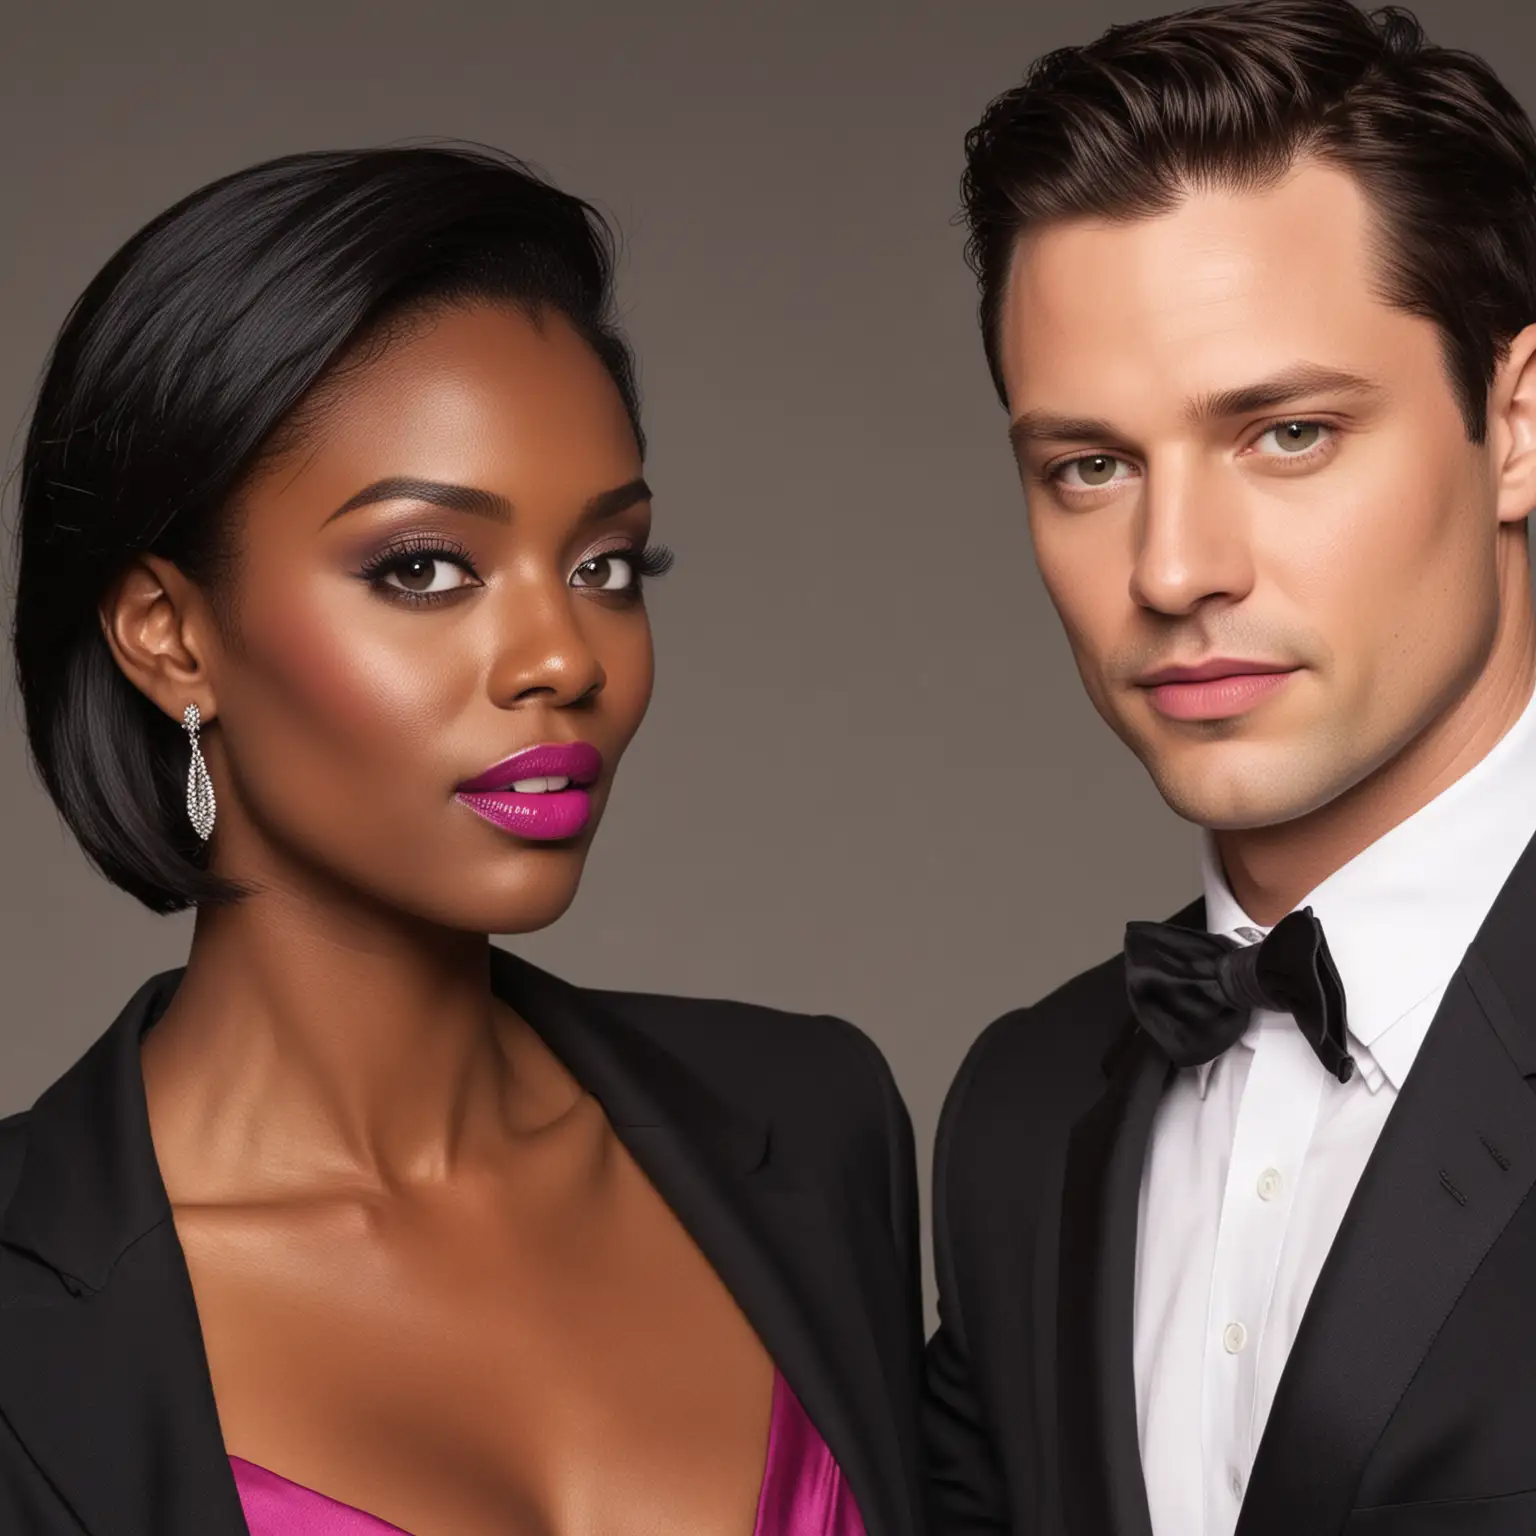 Stylish Interracial Couple Handsome Male Model in Suit and Beautiful Woman in Fuchsia Dress